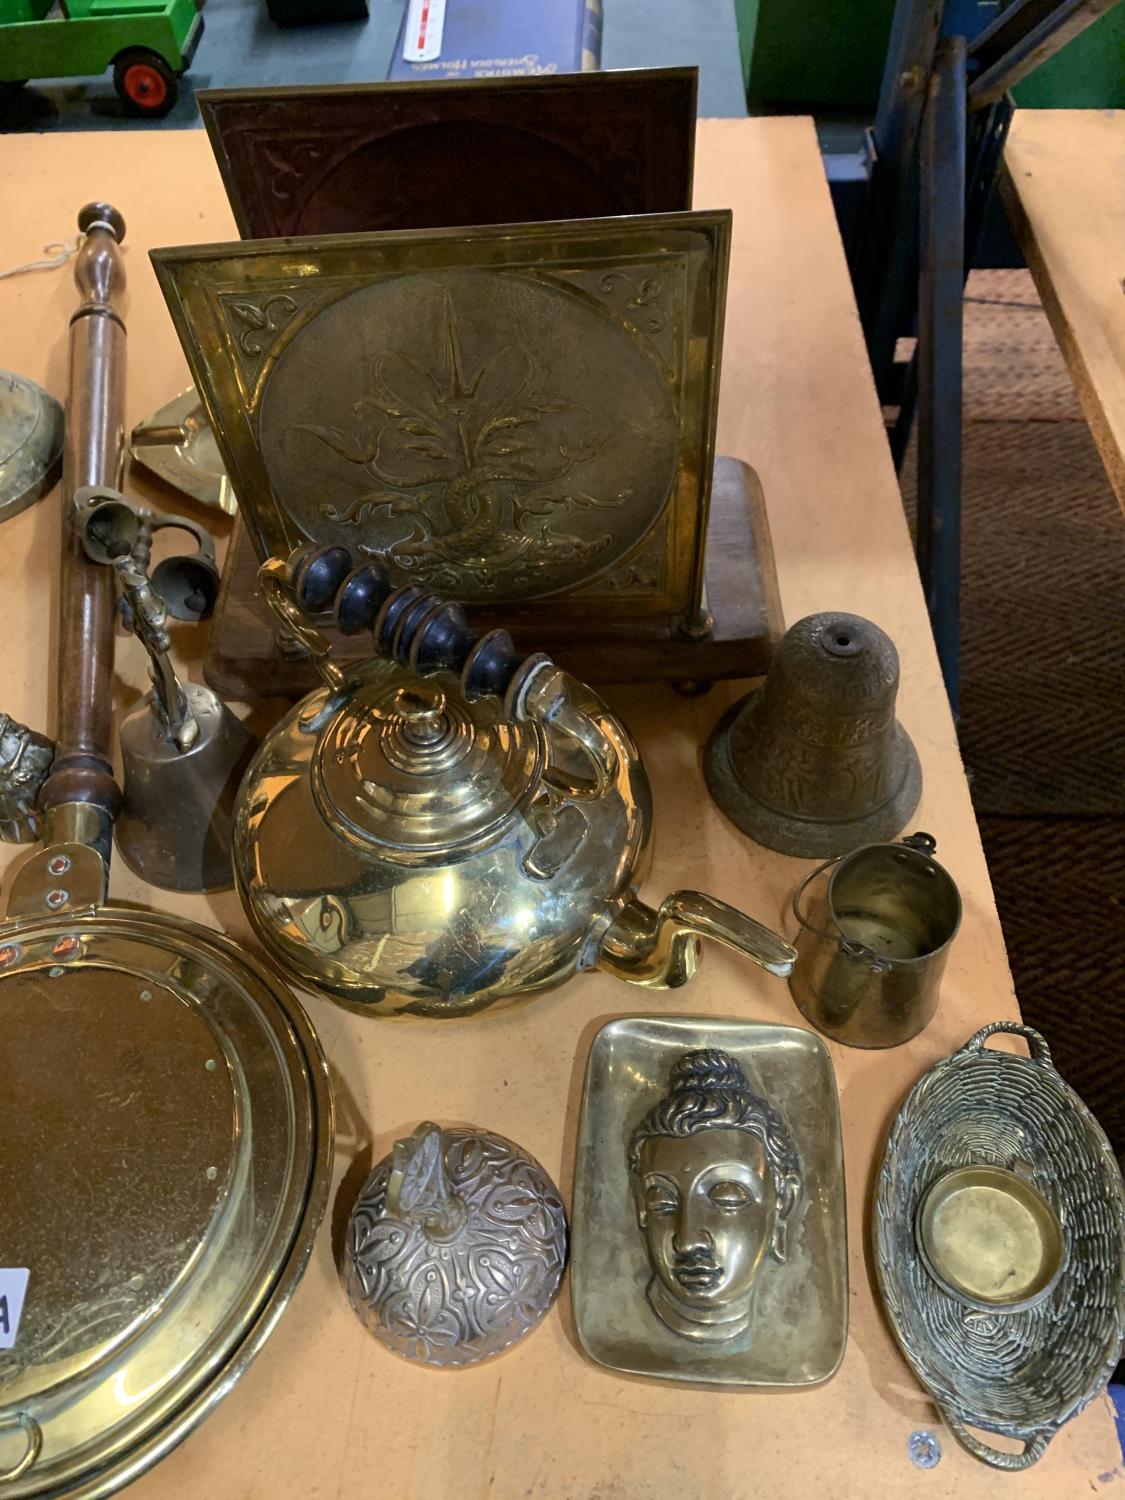 A LARGE QUANTITY OF BRASSWARE TO INCLUDE A BELL, HORSE BRASSES, KETTLE, CANDLESTICKS, CANNON, LAMP - Image 4 of 12